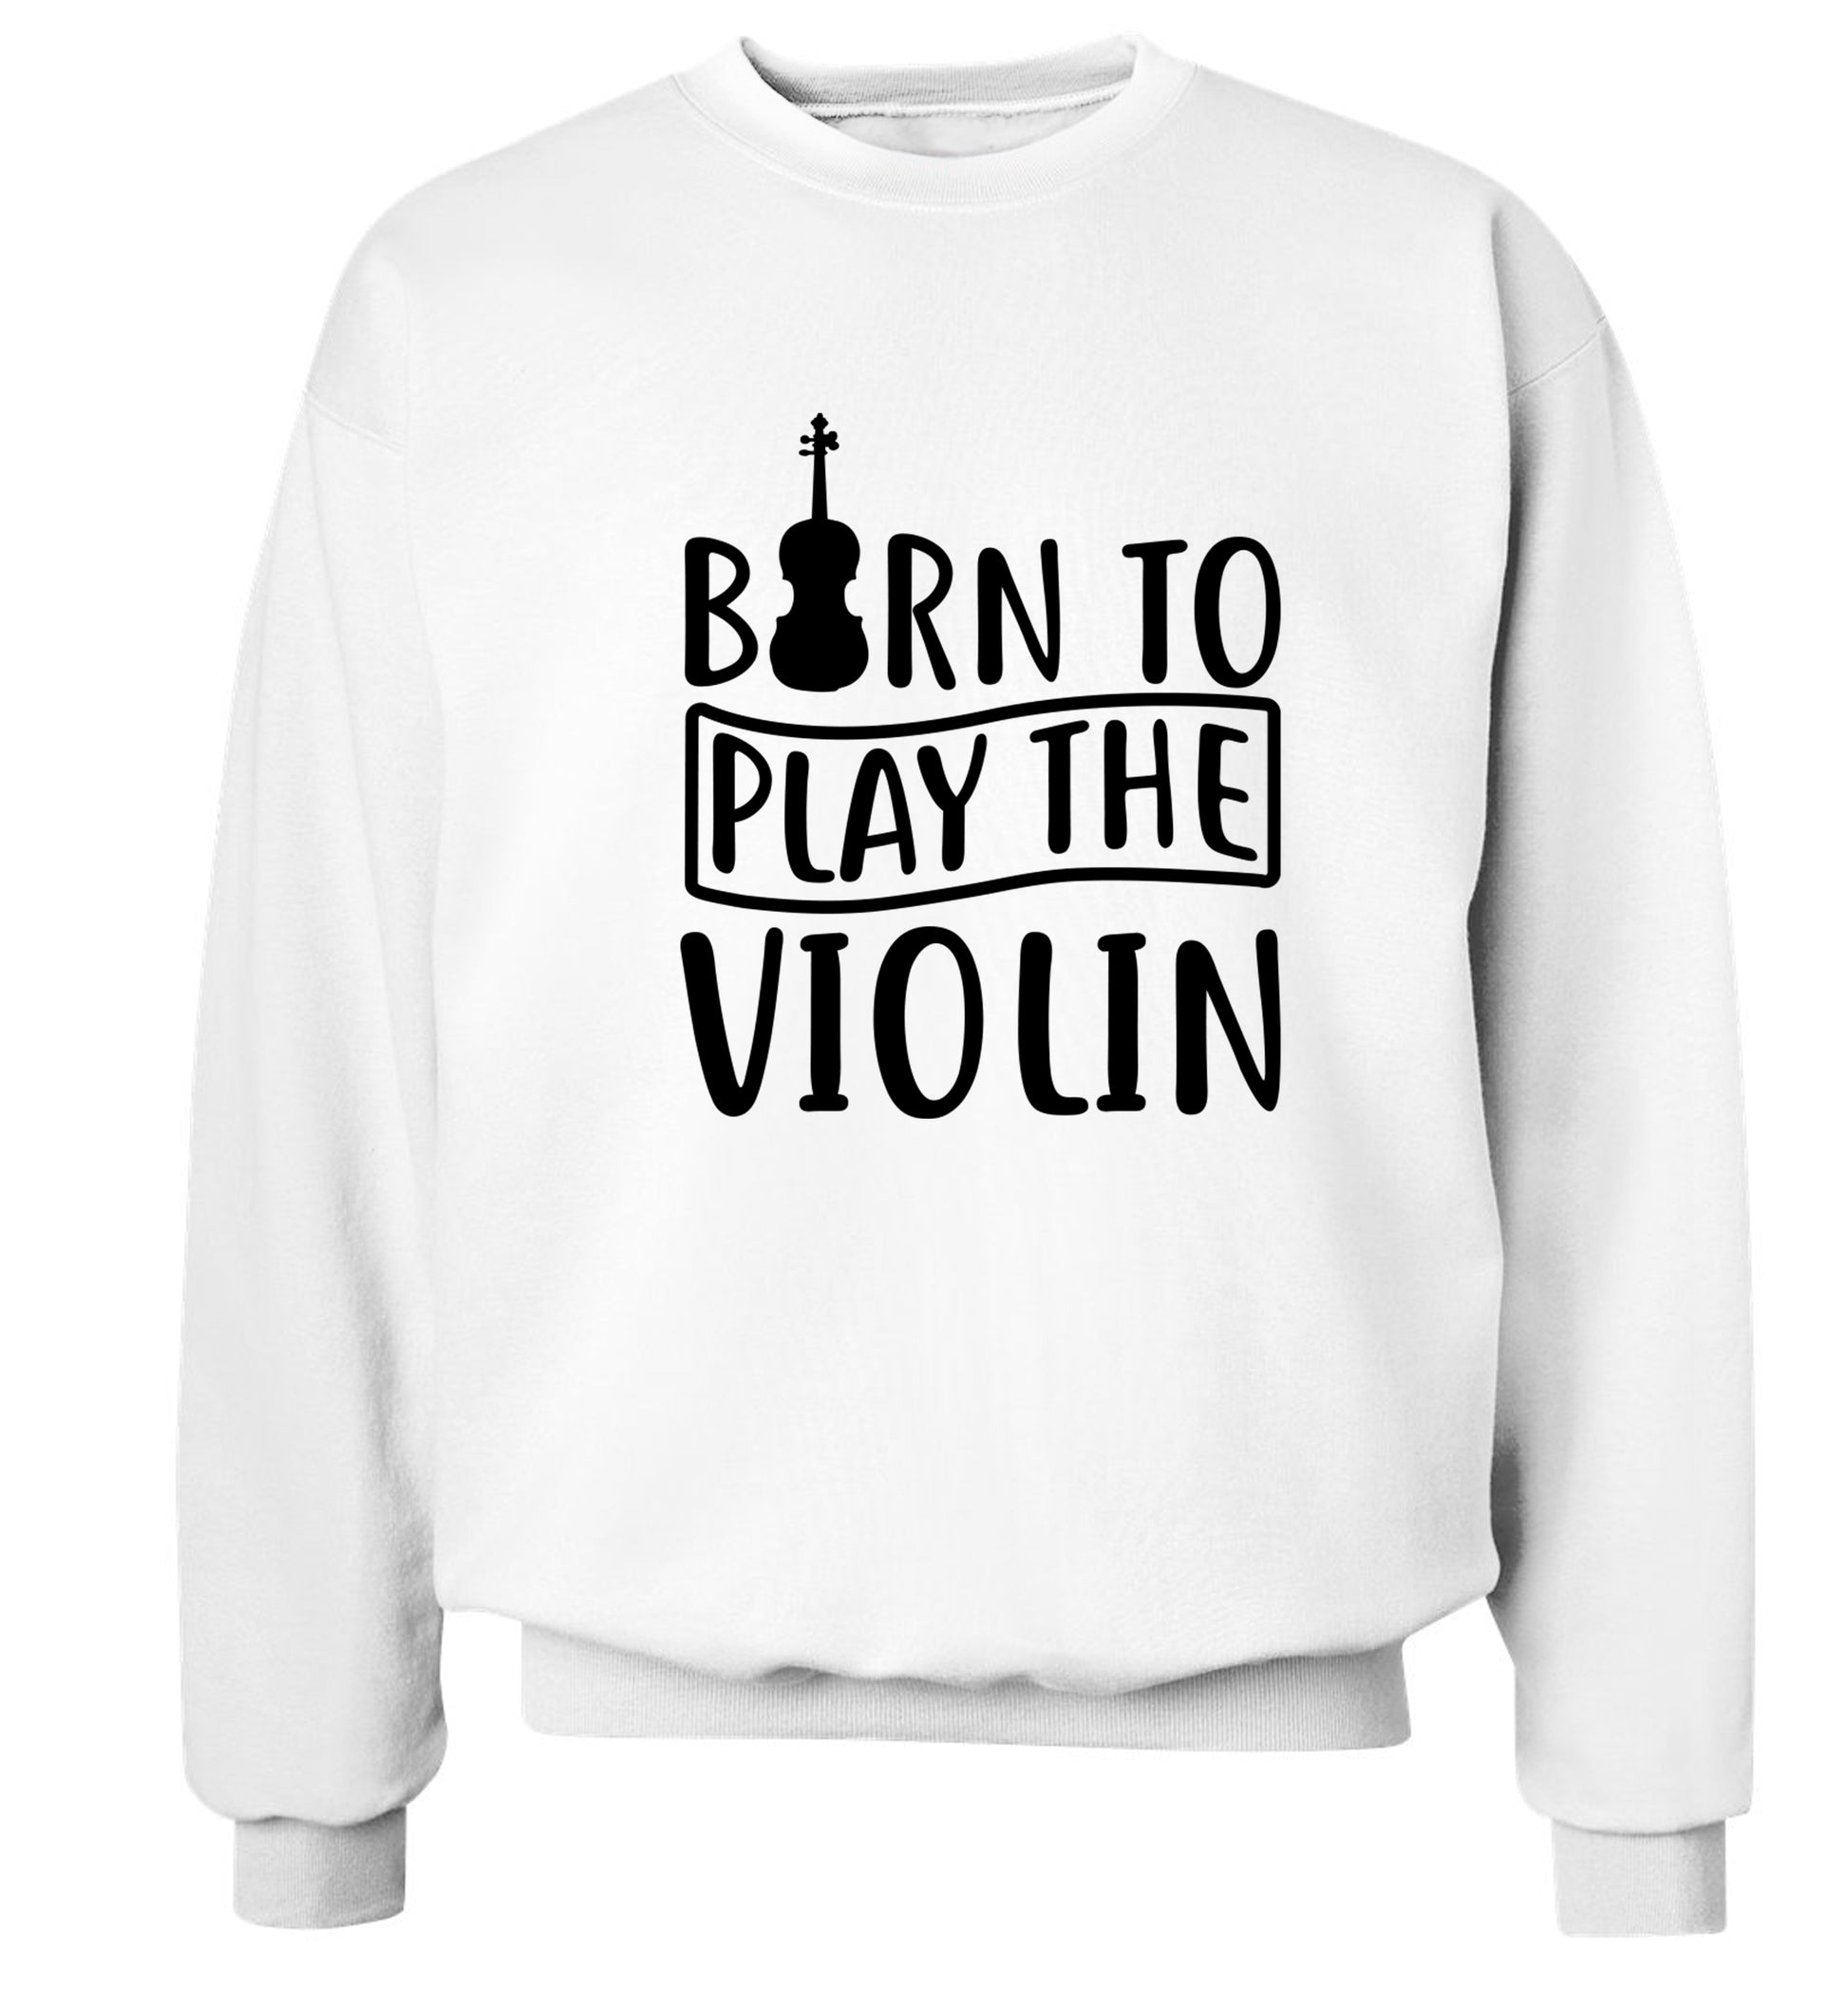 Born to Play the Violin Adult's unisex white Sweater 2XL